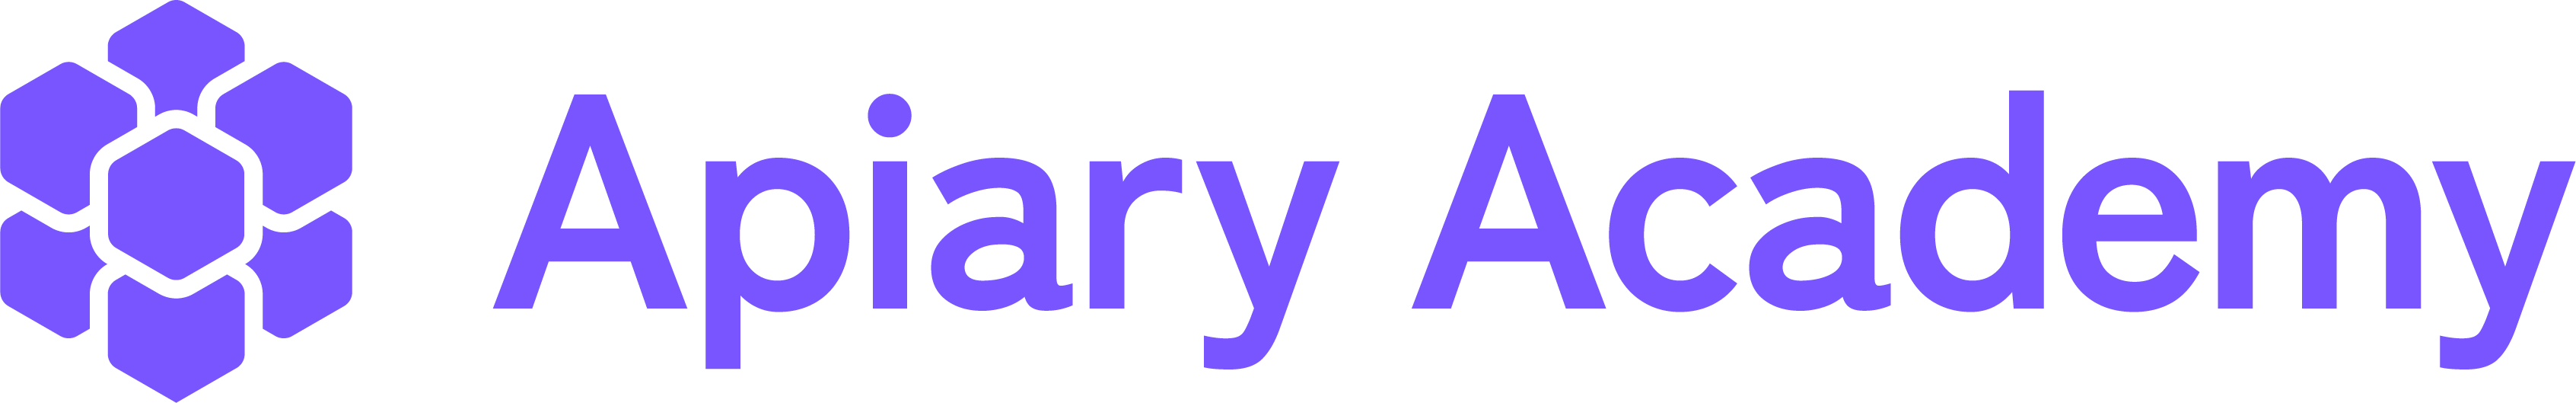 Apiary Academy_logo-03 (1) (1).png